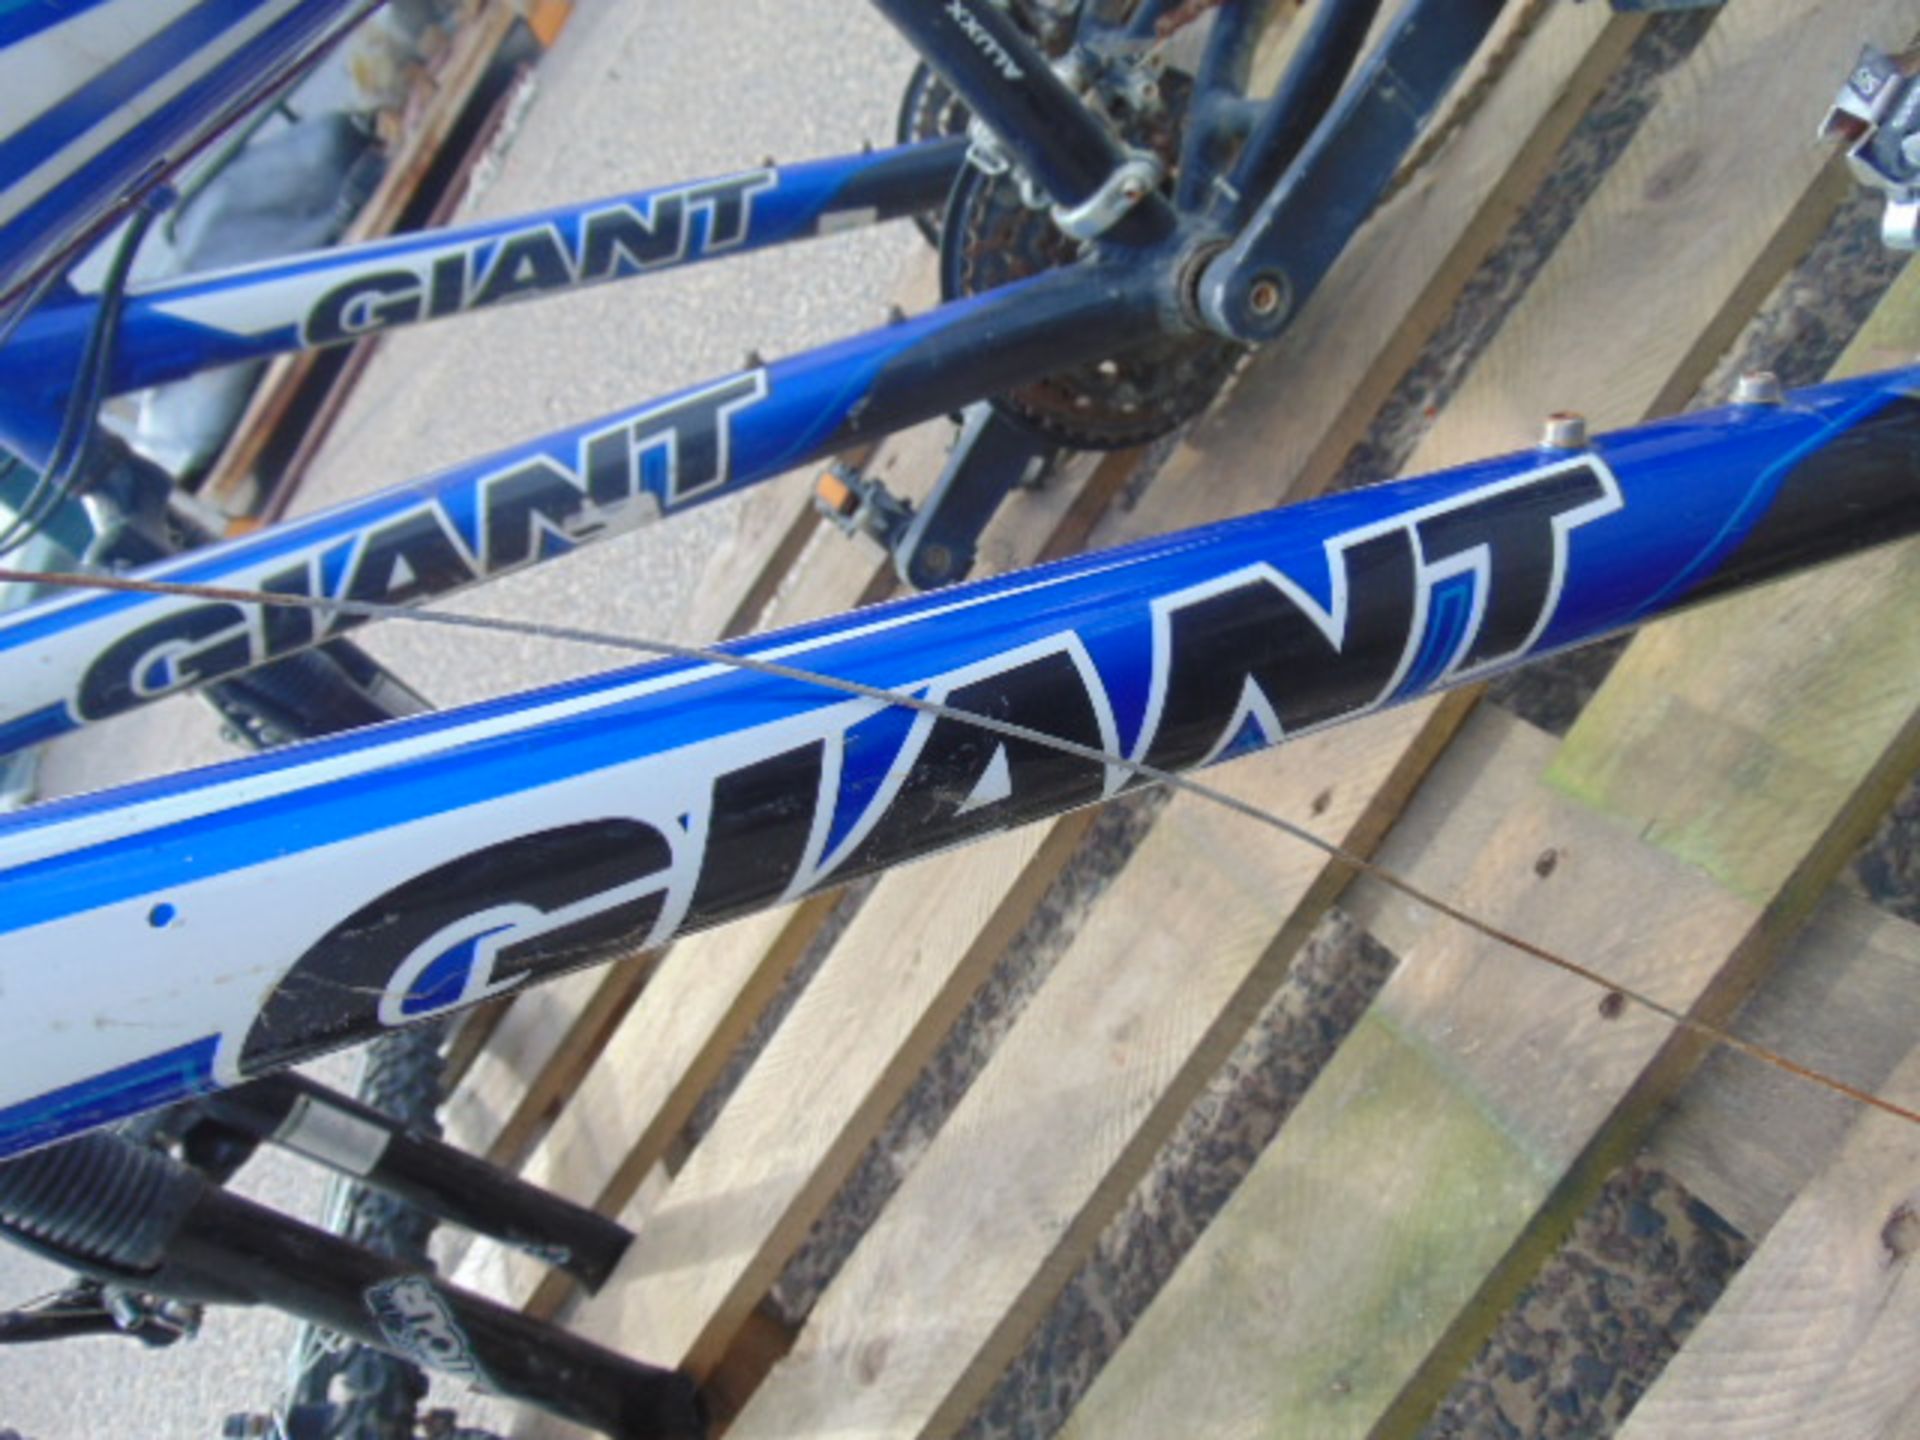 3 x Giant Alluxx 6000 Series Bike Frames with Forks, 2 x wheels etc - Image 7 of 9